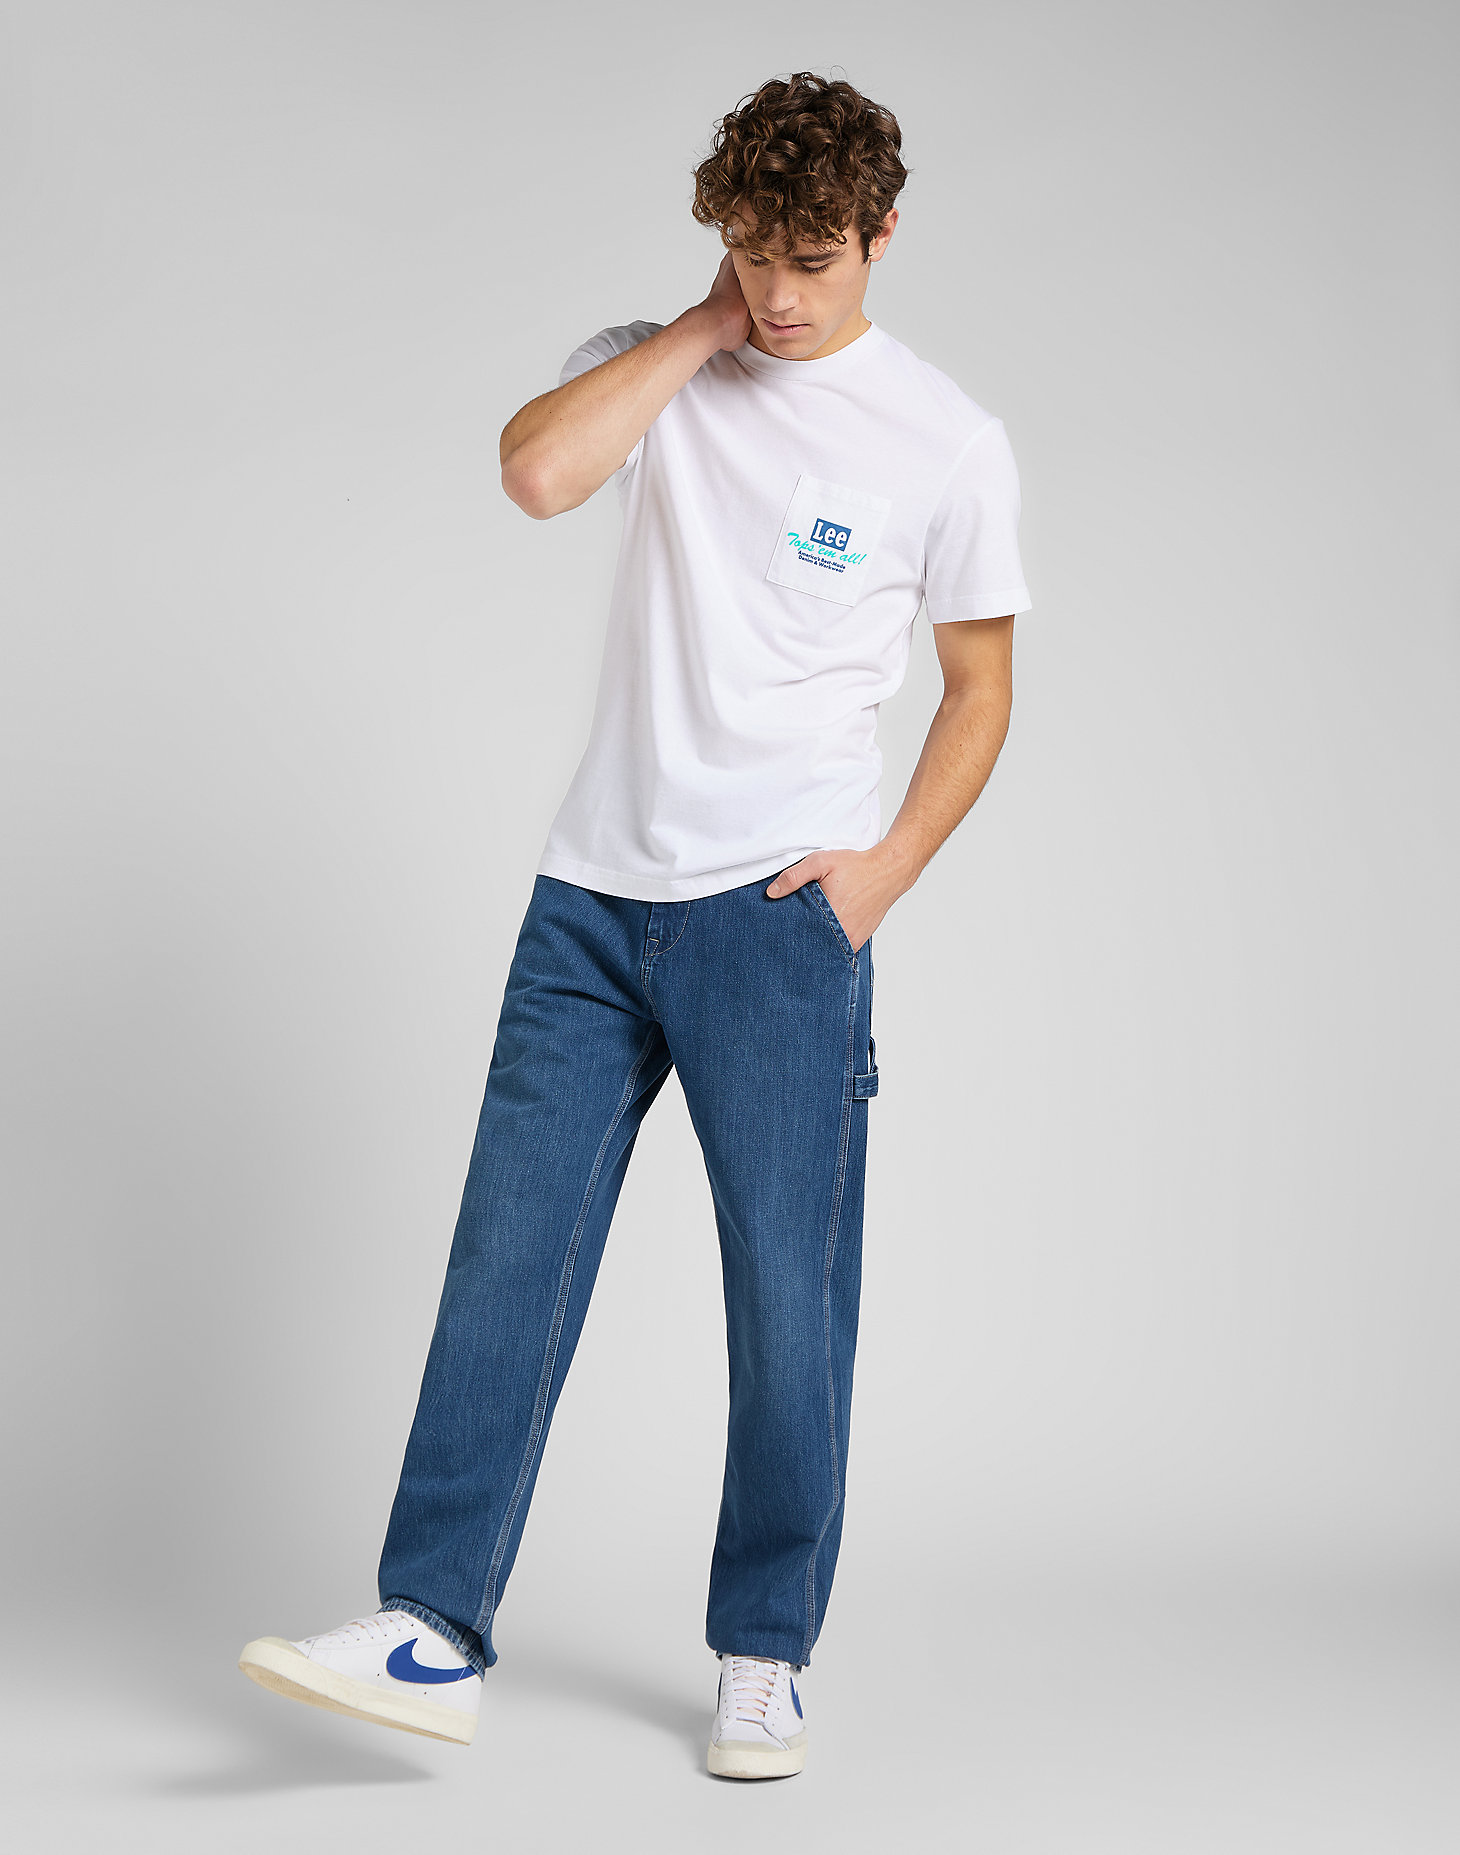 Lee Jeans Tee in Bright White alternative view 2